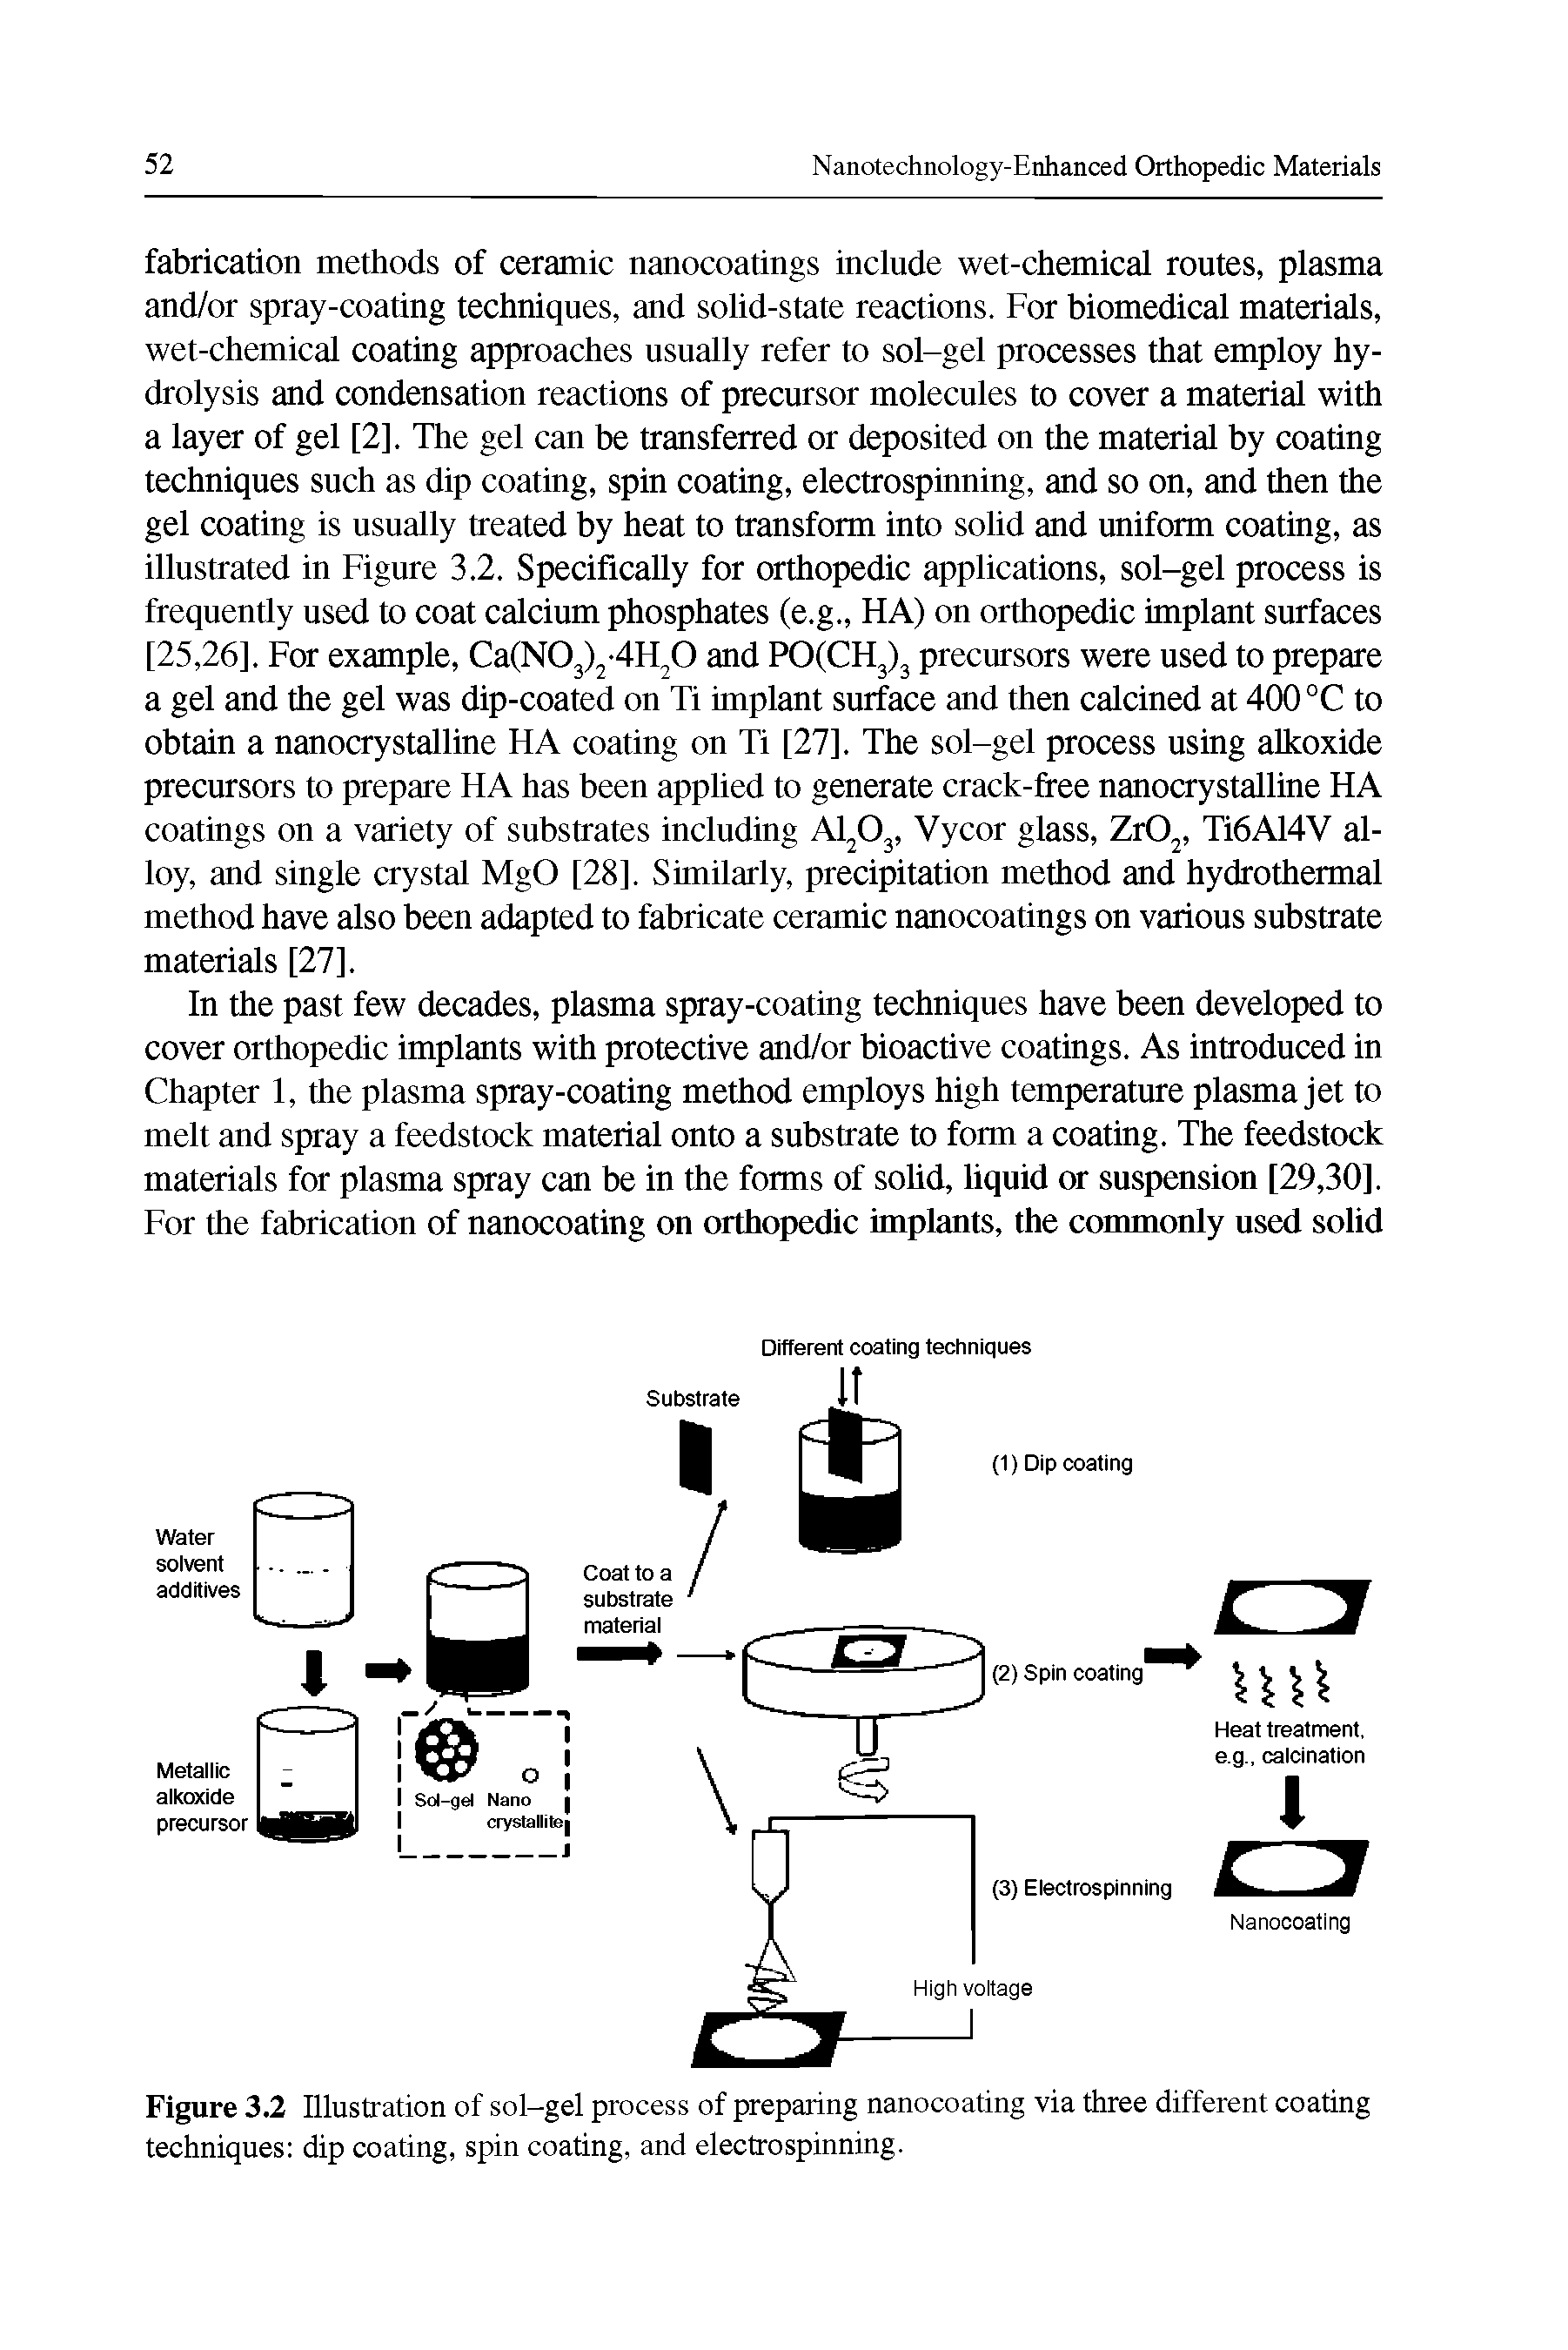 Figure 3.2 Illustration of sol-gel process of preparing nanocoating via three different coating techniques dip coating, spin coating, and electro spinning.